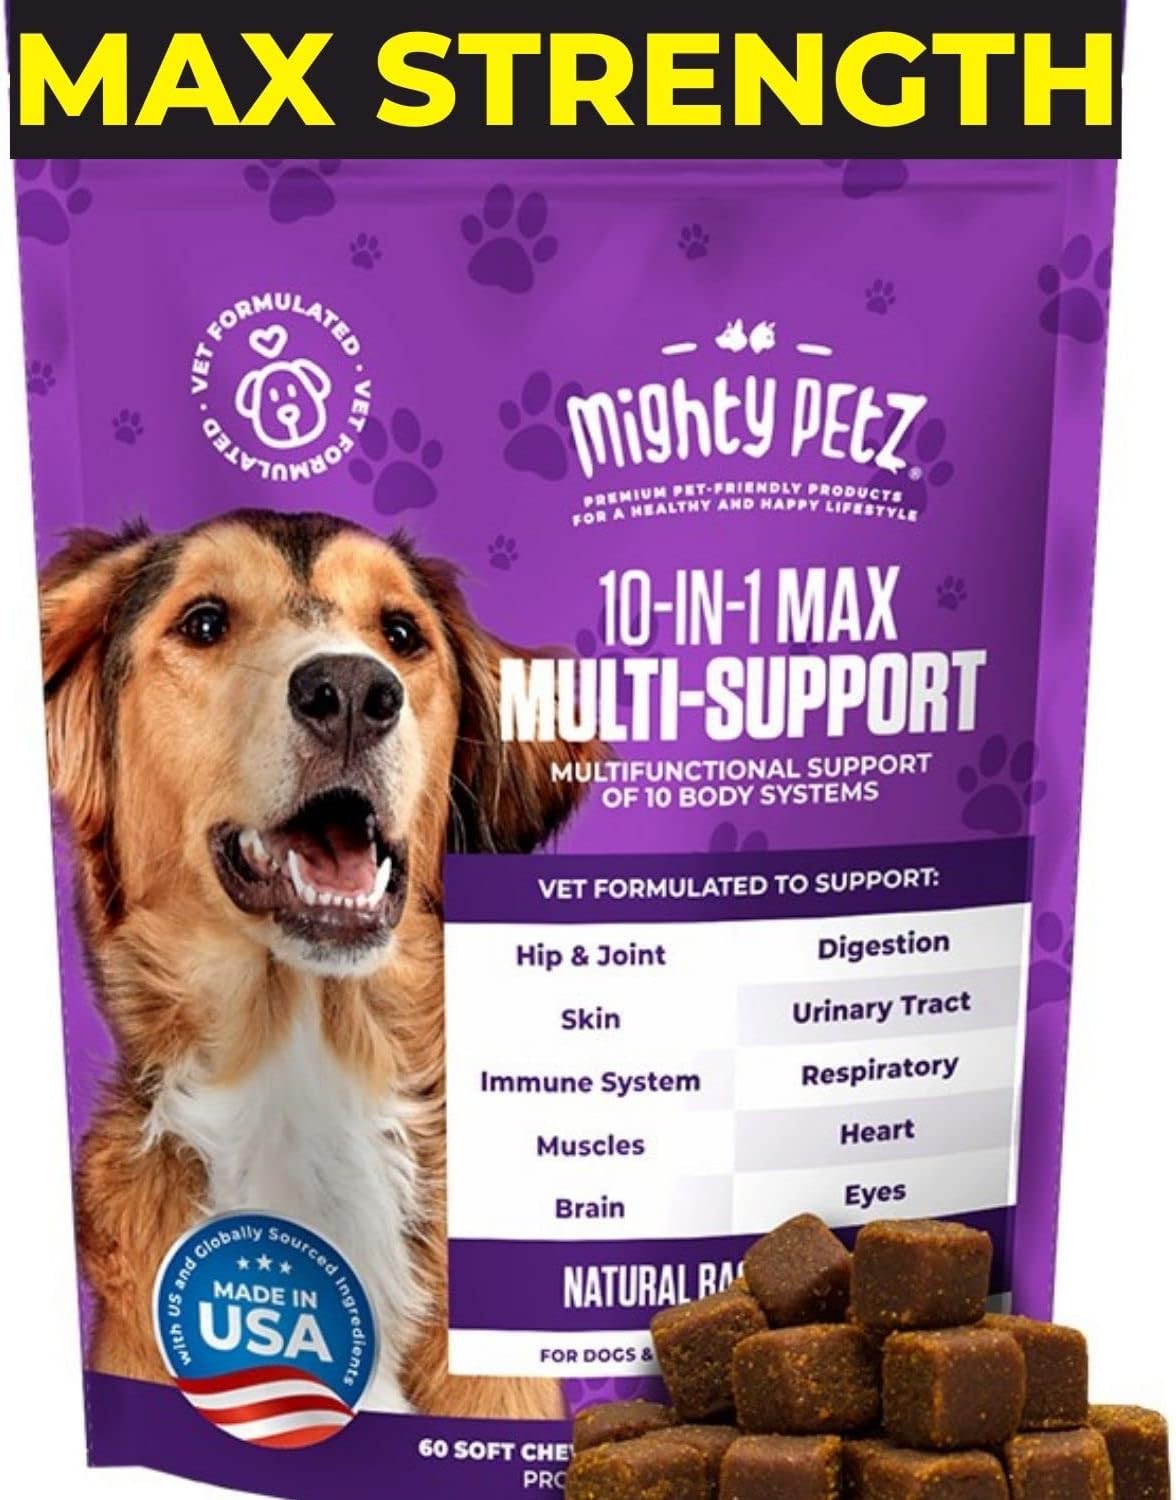 Mighty Petz MAX Dog Multivitamin - Senior & Adult Dog Vitamins 10 in 1 Complete Support for Joints, Immunity, Mobility, Gut, Energy, Skin Health. Daily Pet Chewable Supplement